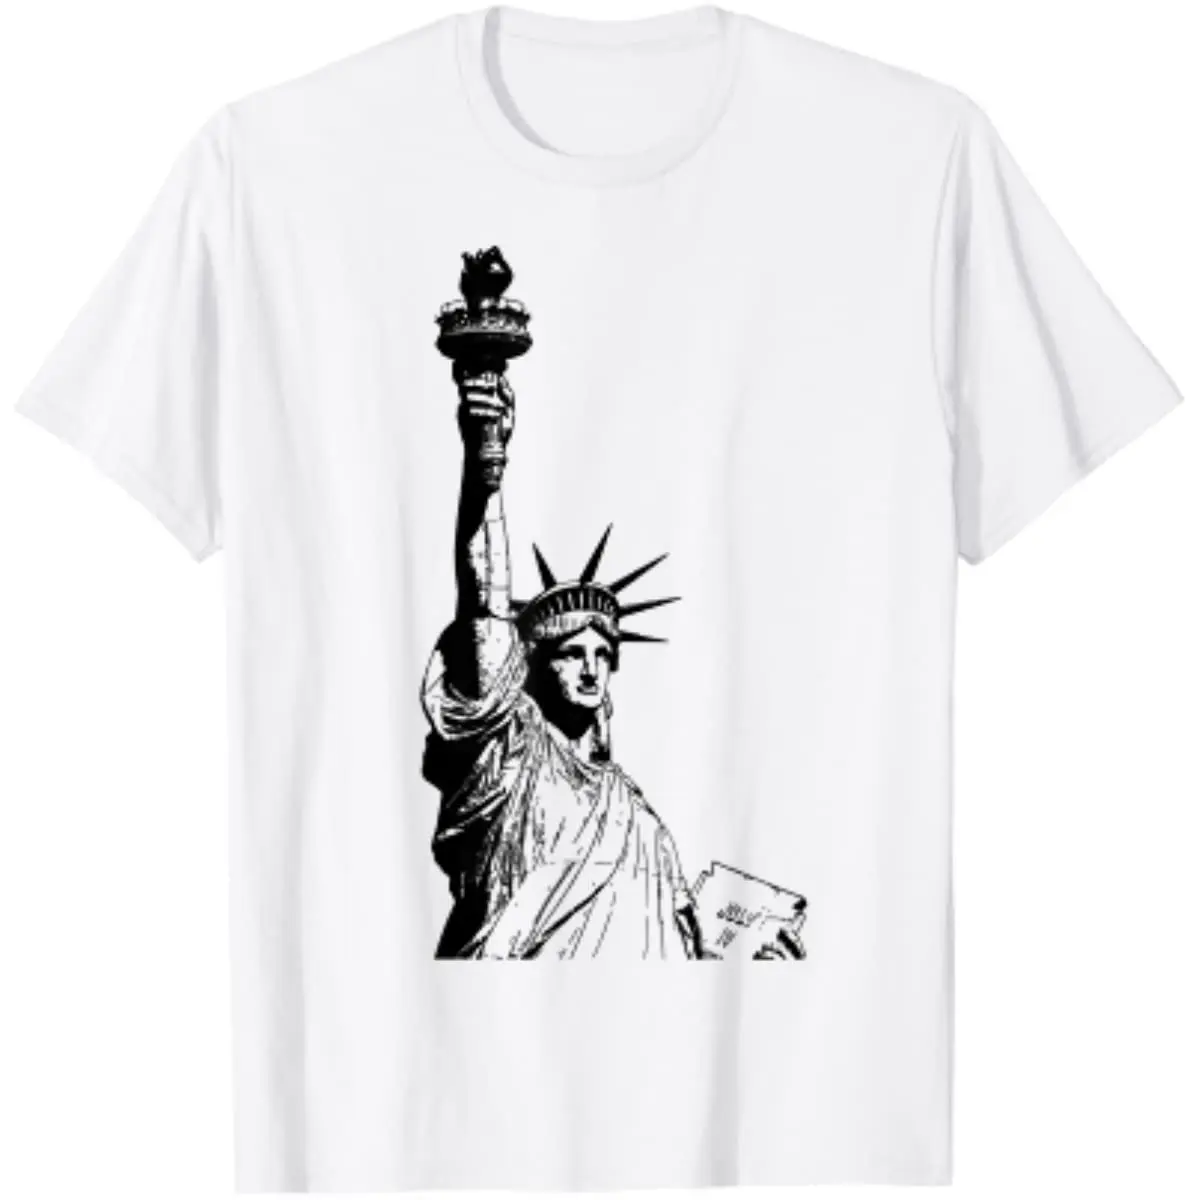 

Statue of Liberty T-Shirt 4th of July Independence Day Merica Graphic T Shirts Men Clothing Casual Cotton Daily Four Seasons